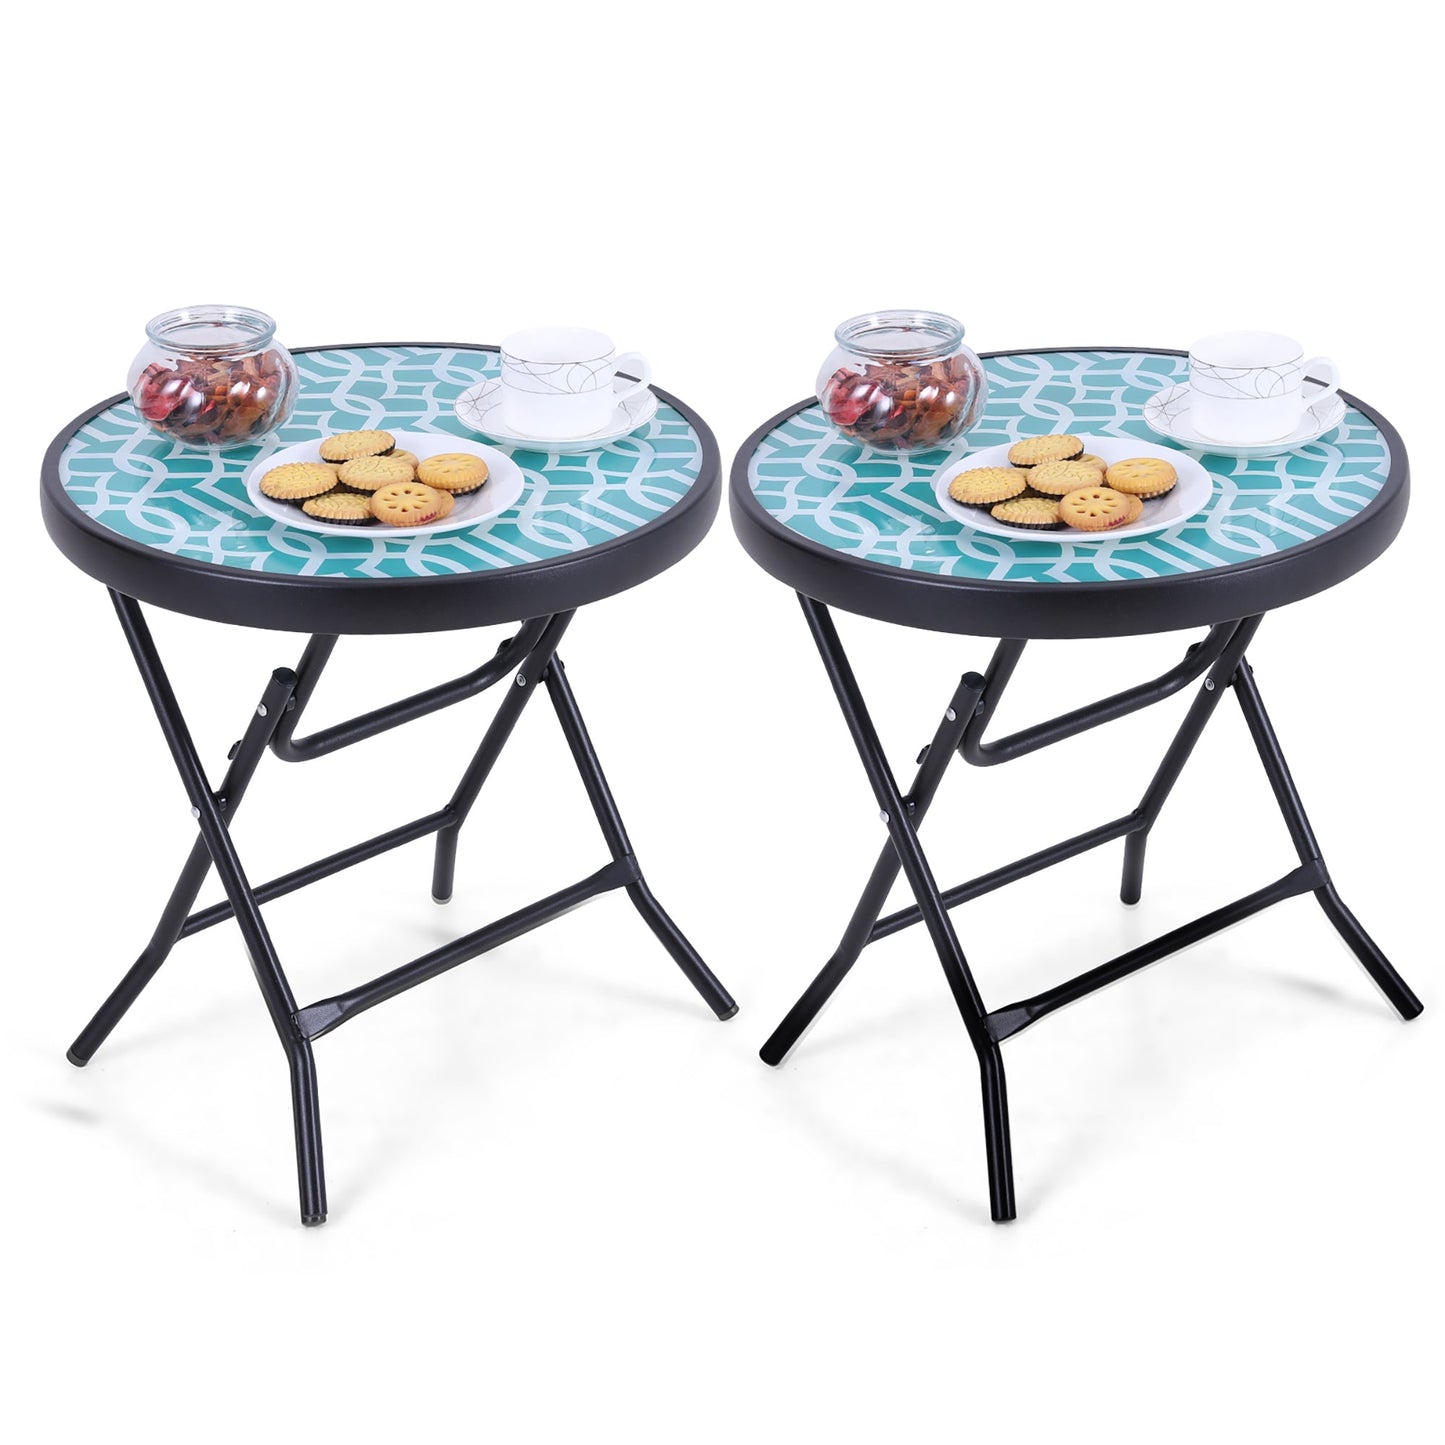 Sophia & William 2 Piece 18 inch Patio Round Folding Side Table Small Portable Bistro Coffee Table Tempered Glass Top